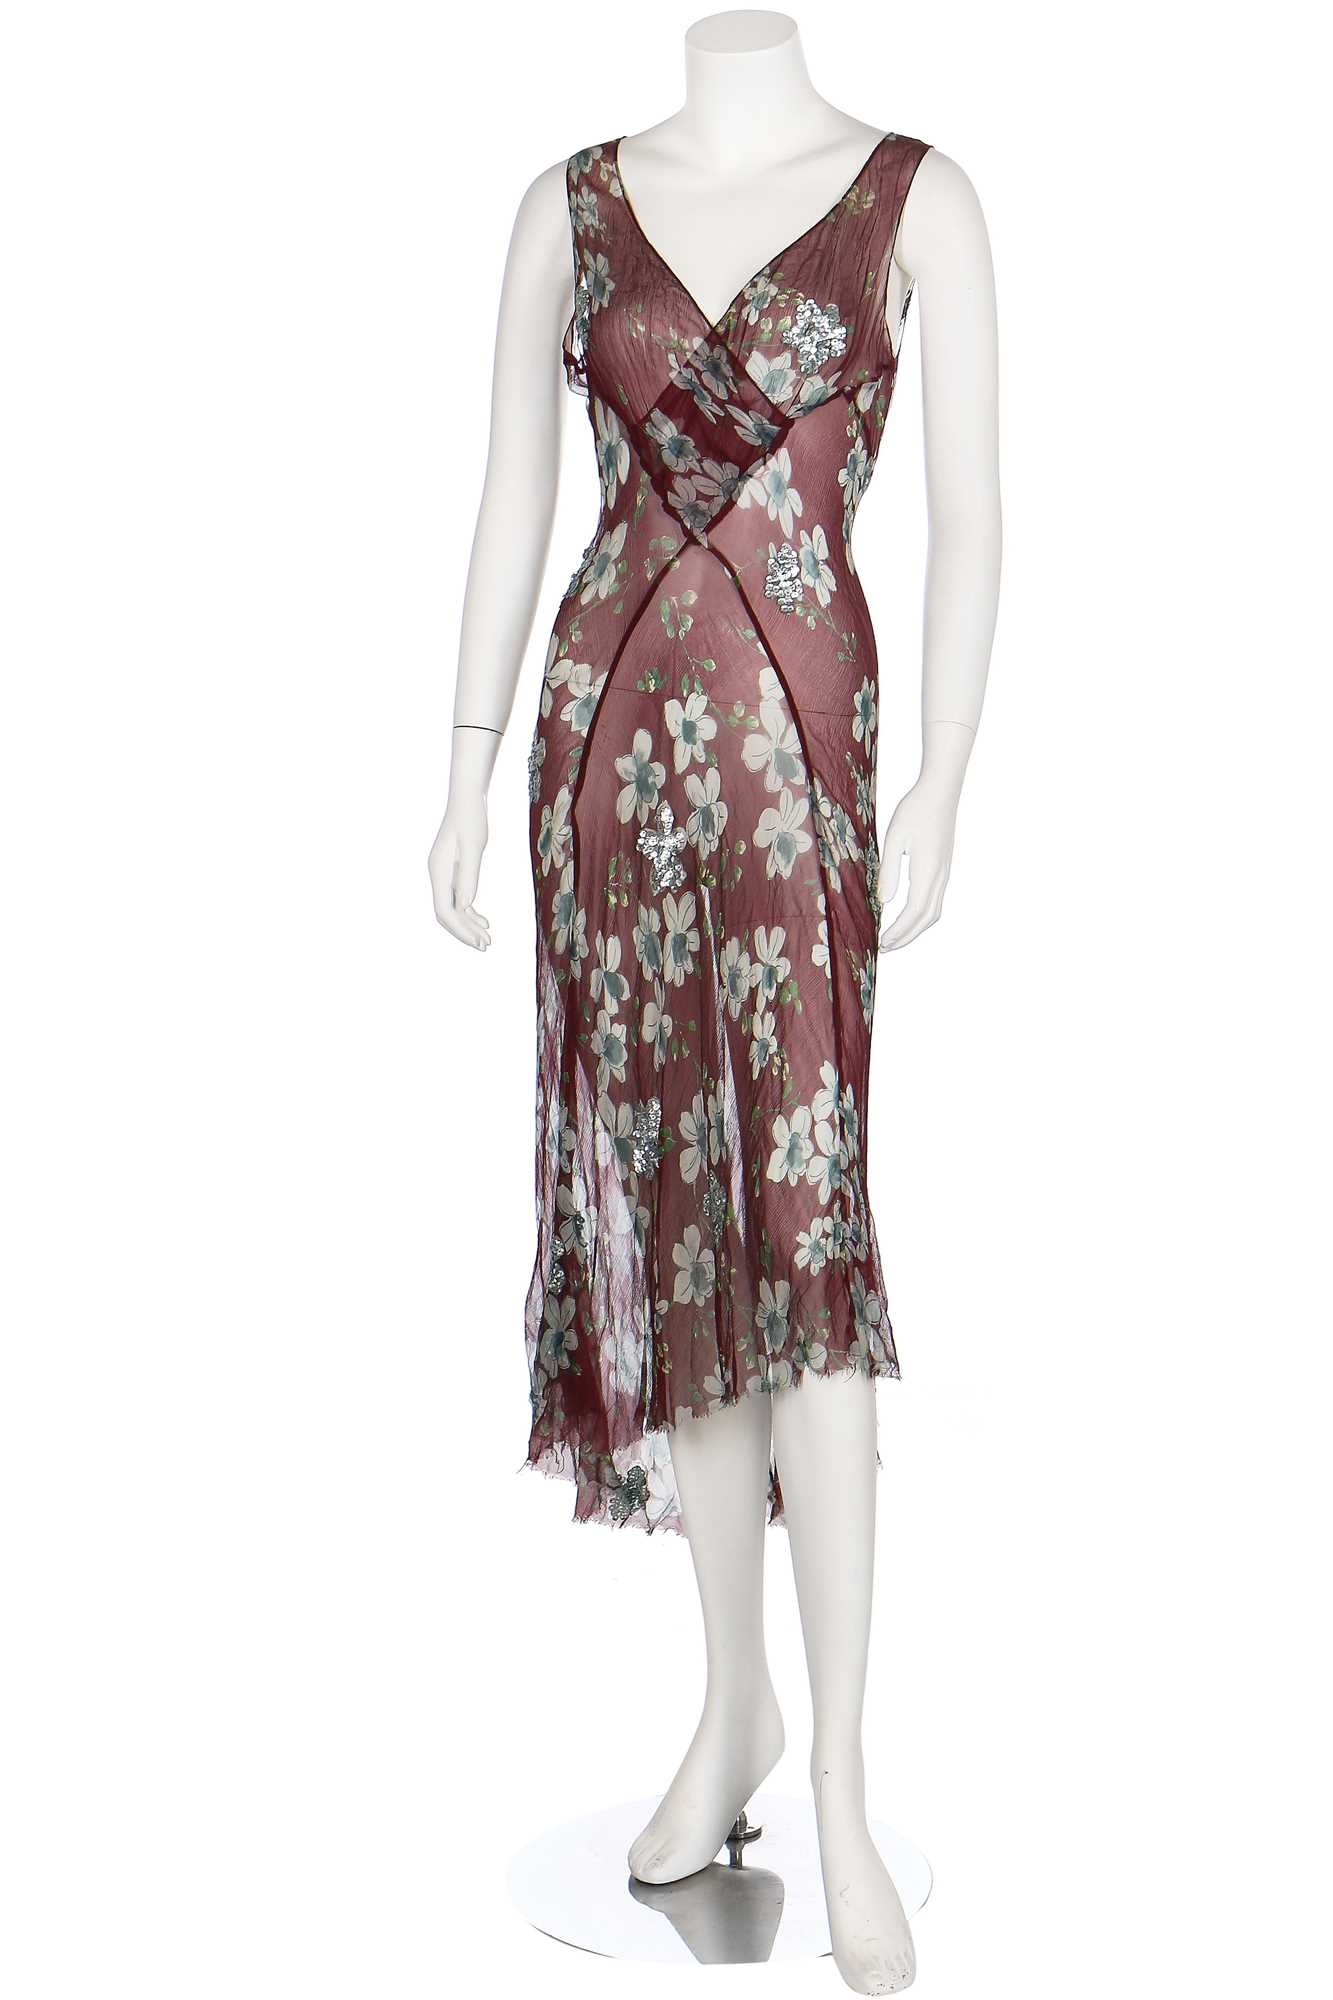 Lot 58 - Two bias-cut floral printed chiffon dresses in autumnal shades, 1930s